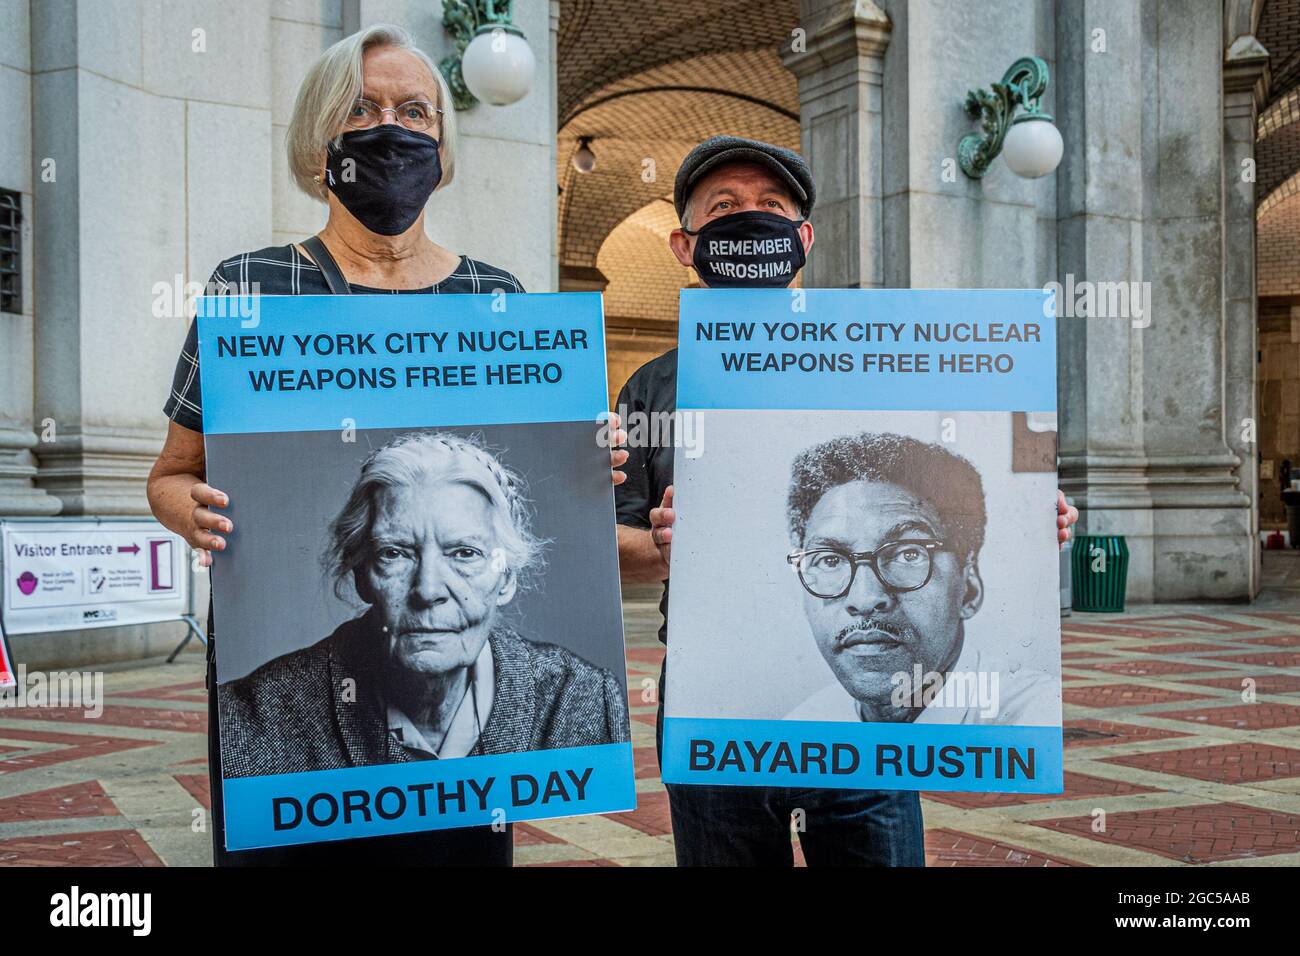 In Commemoration Of The August 6 And August 9 1945 Bombings Of Hiroshima And Nagasaki New York City Based Nuclear Disarmament Advocates Assembled Outside The Municipal Building On August 6 21 To Deliver